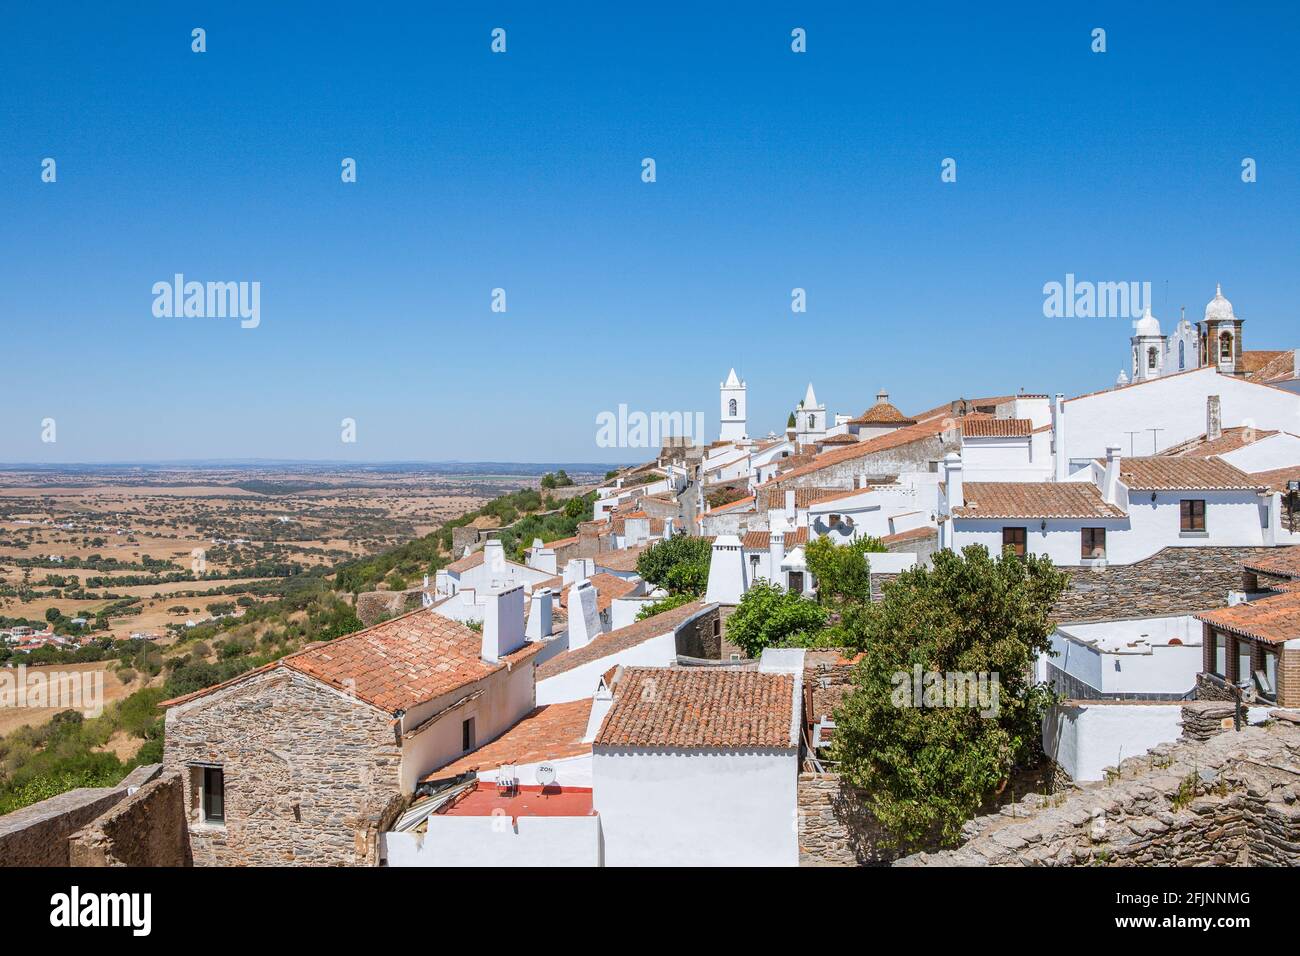 The whitewashed houses of the historical village of Monsaraz, overlooking the Alqueva Dam, the largest artificial lake in Europe, Alentejo, Portugal. Stock Photo